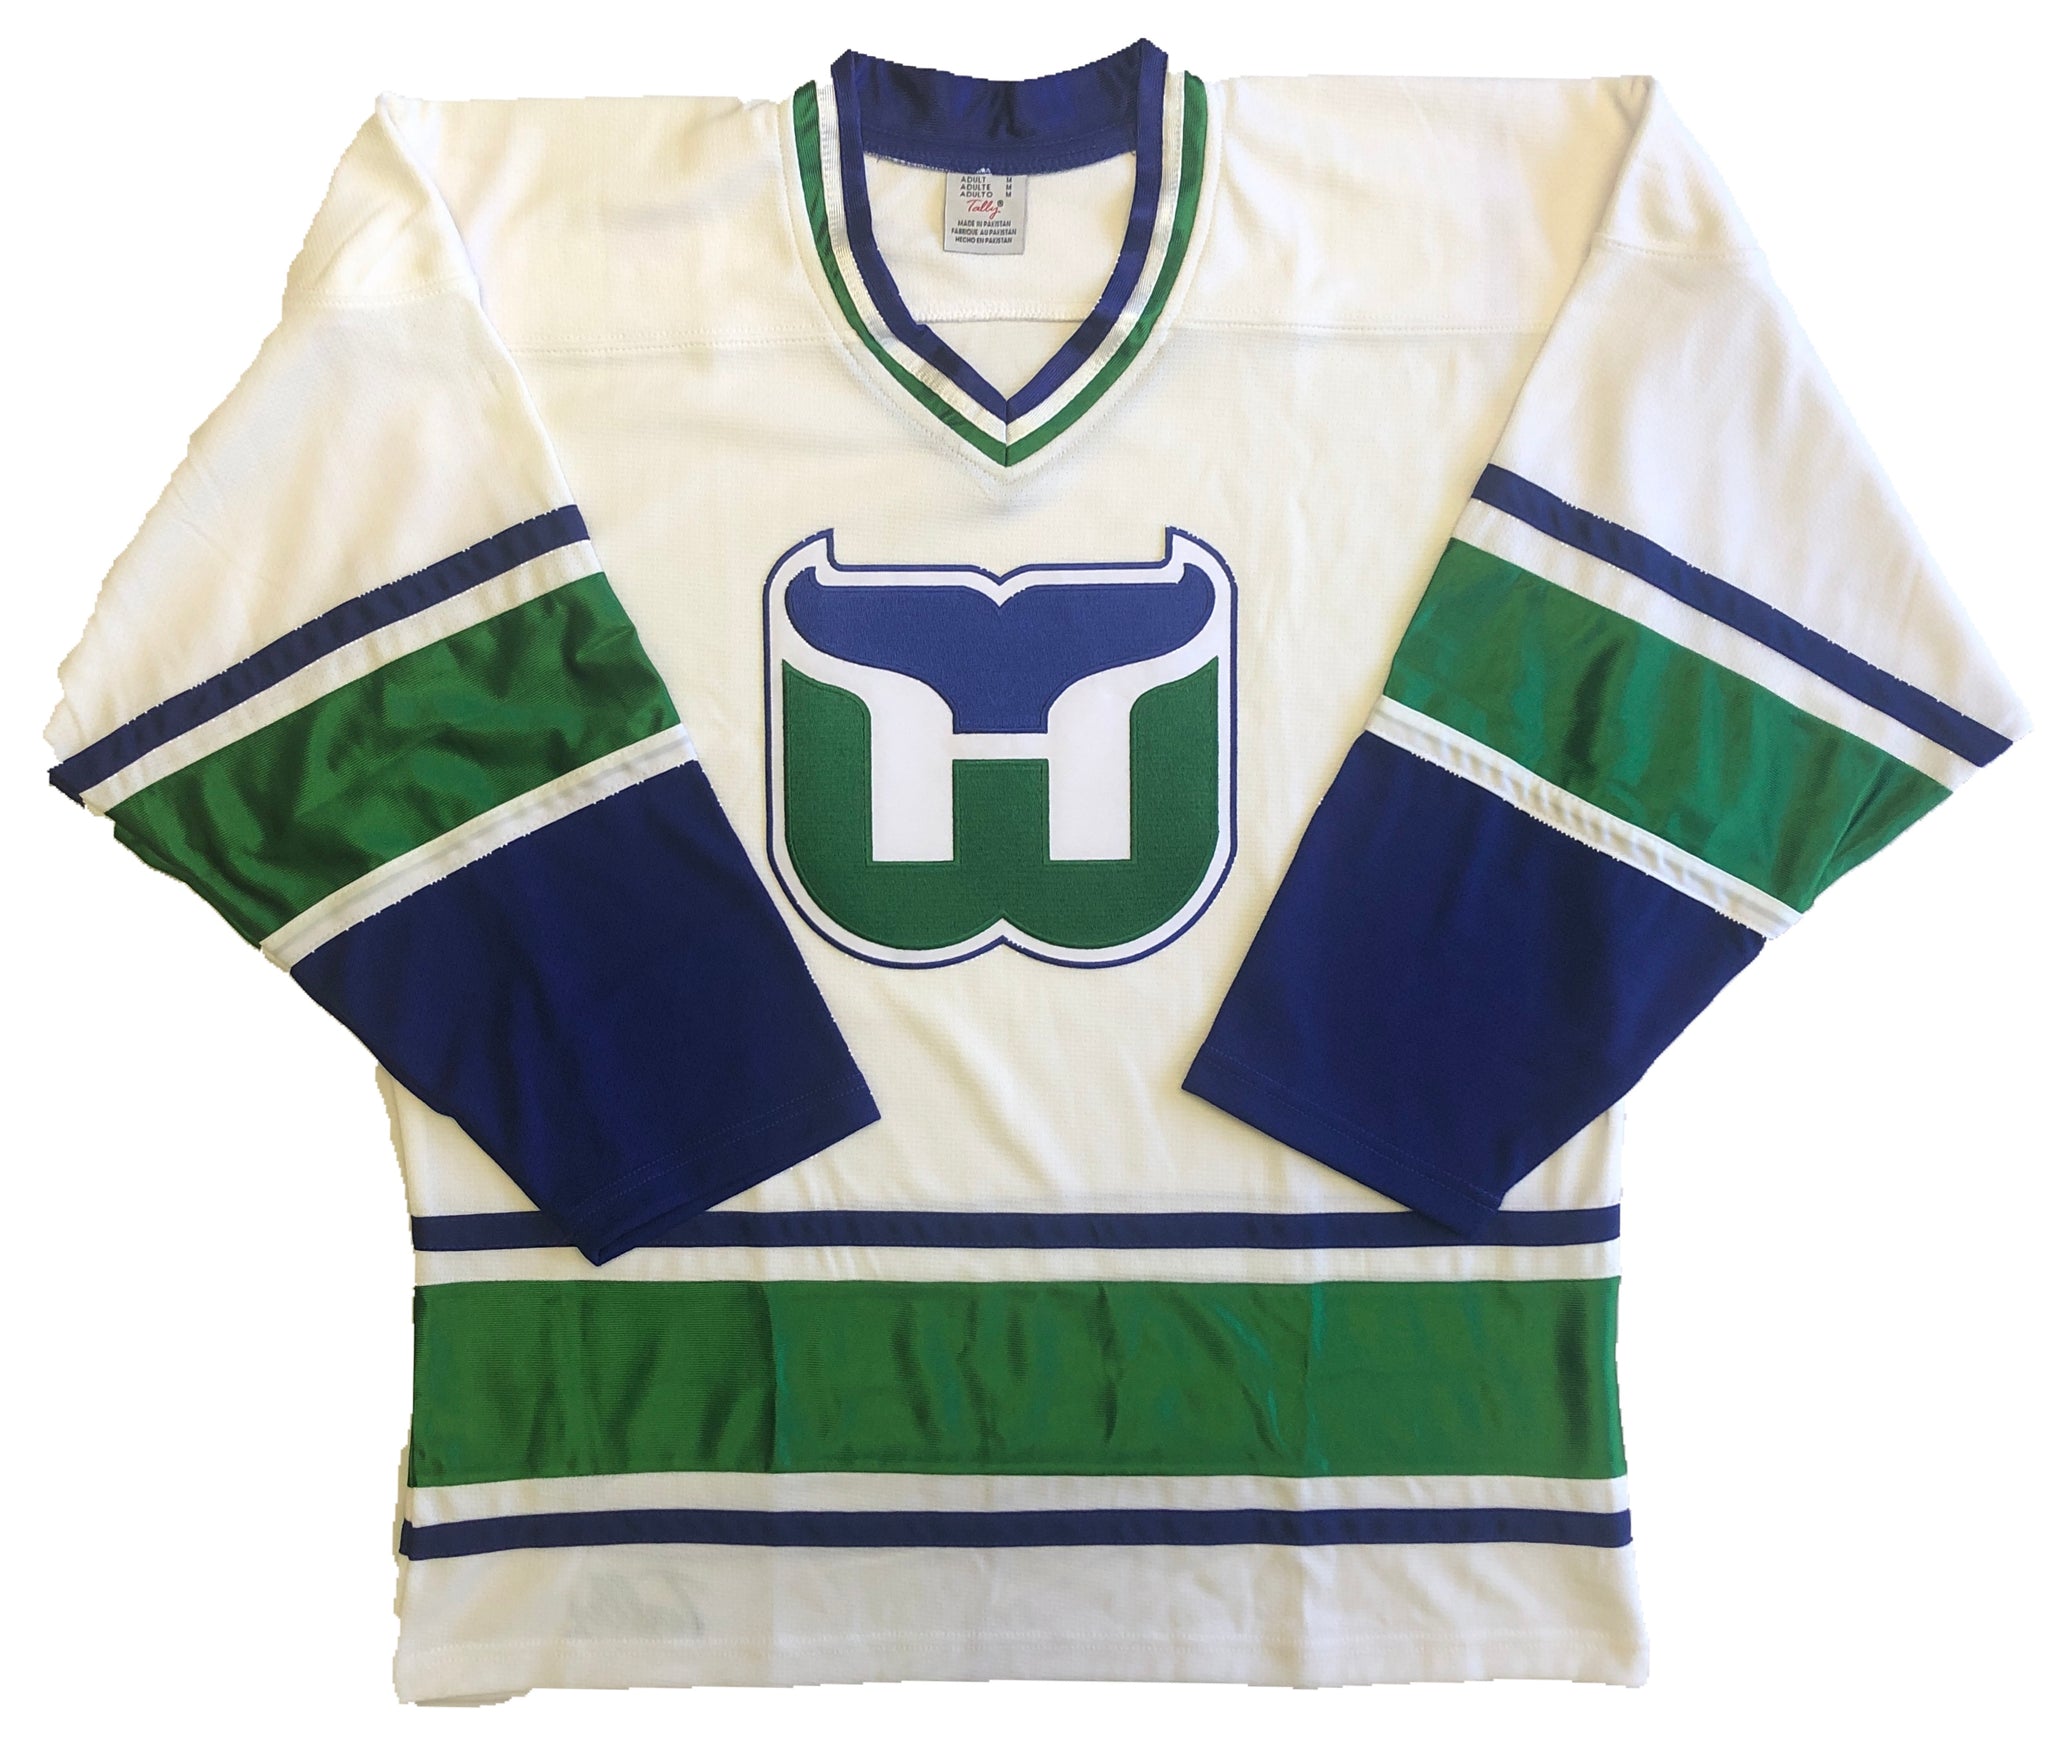 White and Blue Hockey Jerseys with the Whalers Embroidered Twill Logo –  Tally Hockey Jerseys